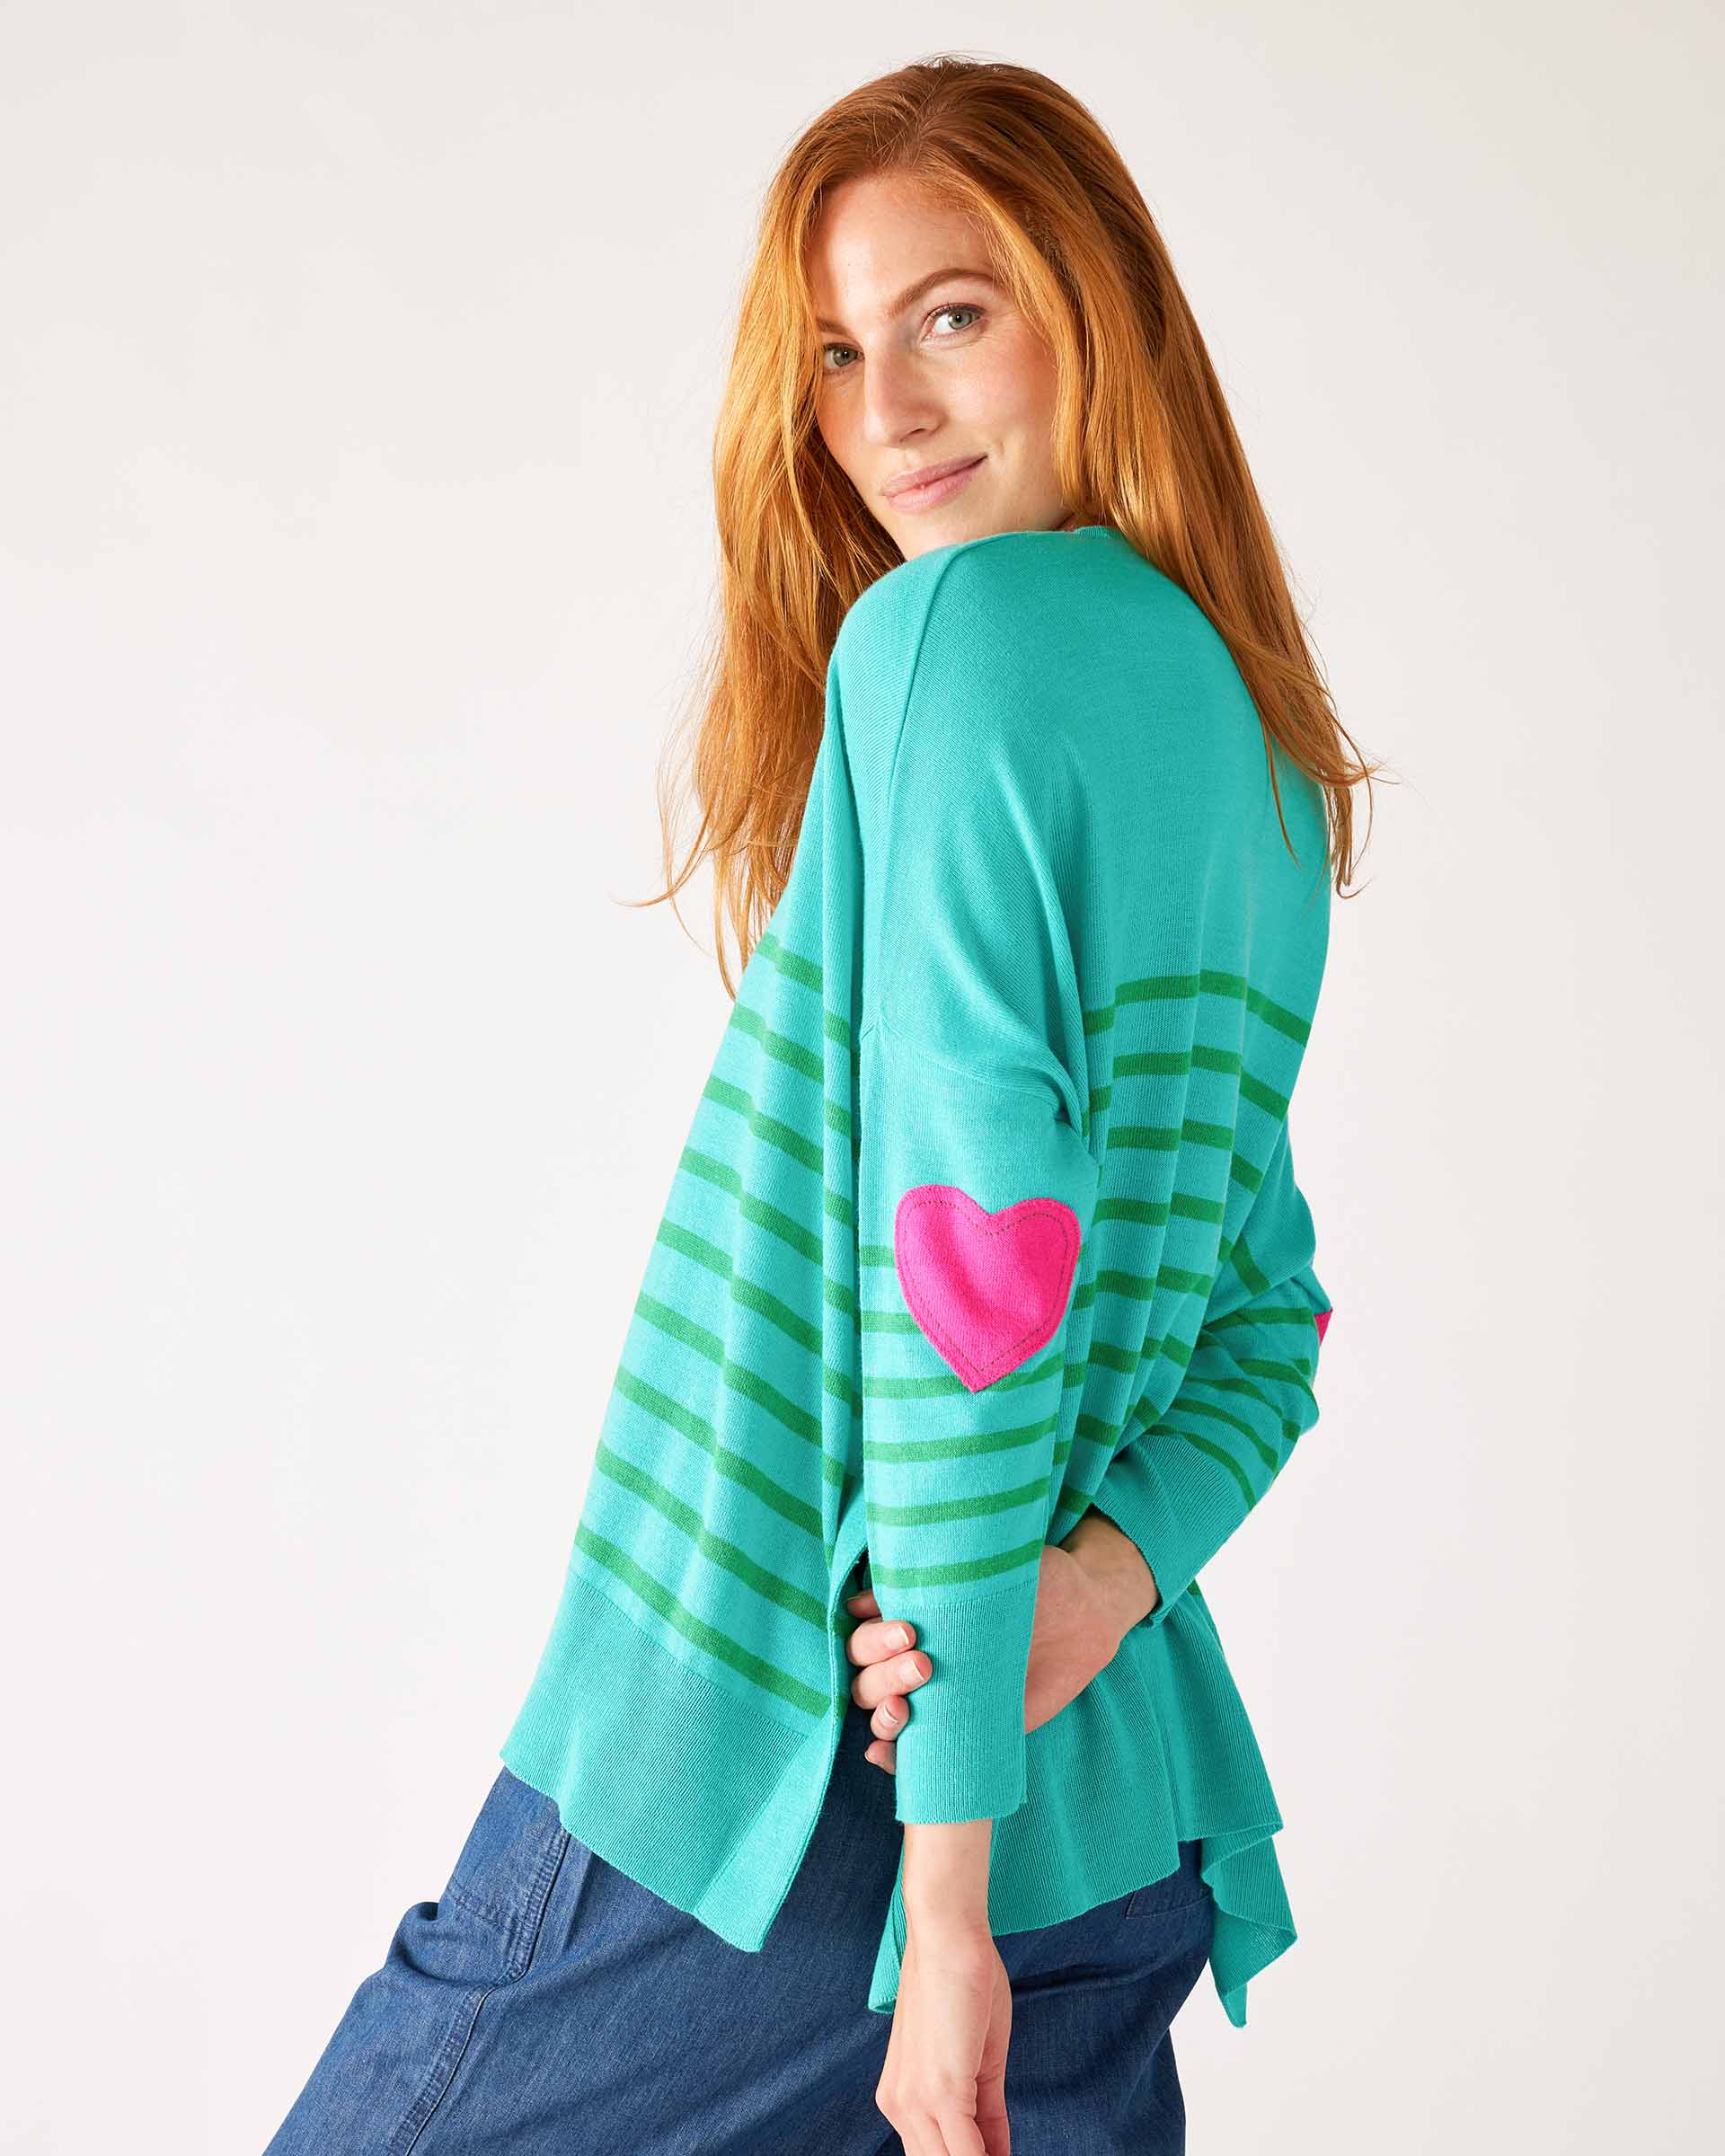 Women's One Size Green Striped Sweater with Pink Hearts on Sleeve Side View